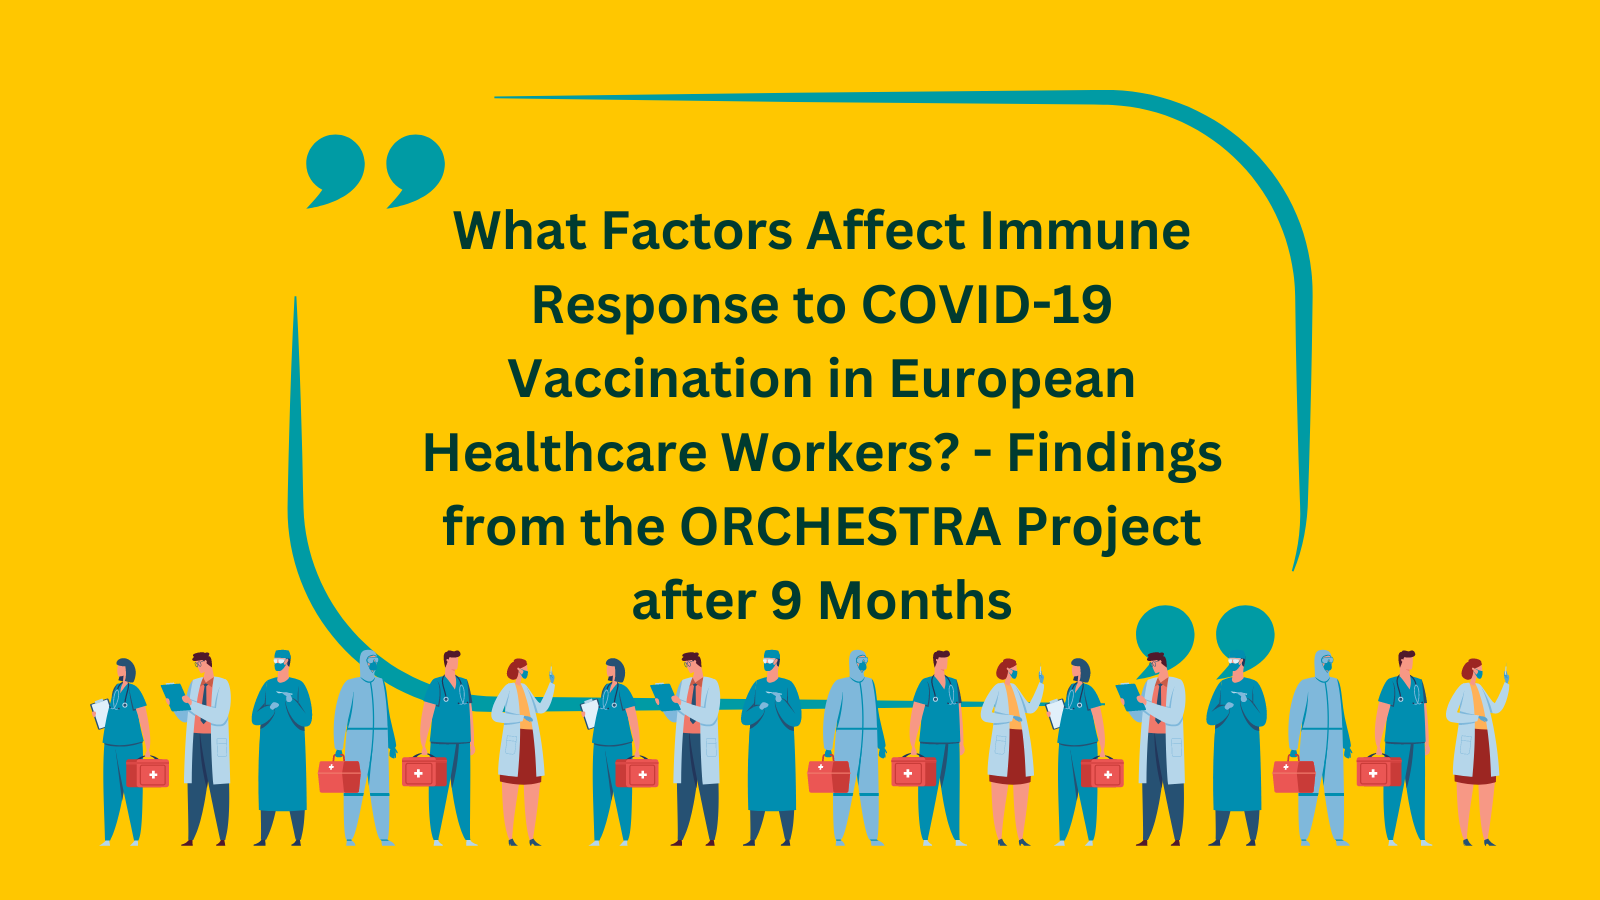 What Factors Affect Immune Response to COVID-19 Vaccination in European Healthcare Workers? – Findings from the ORCHESTRA Project after 9 Months